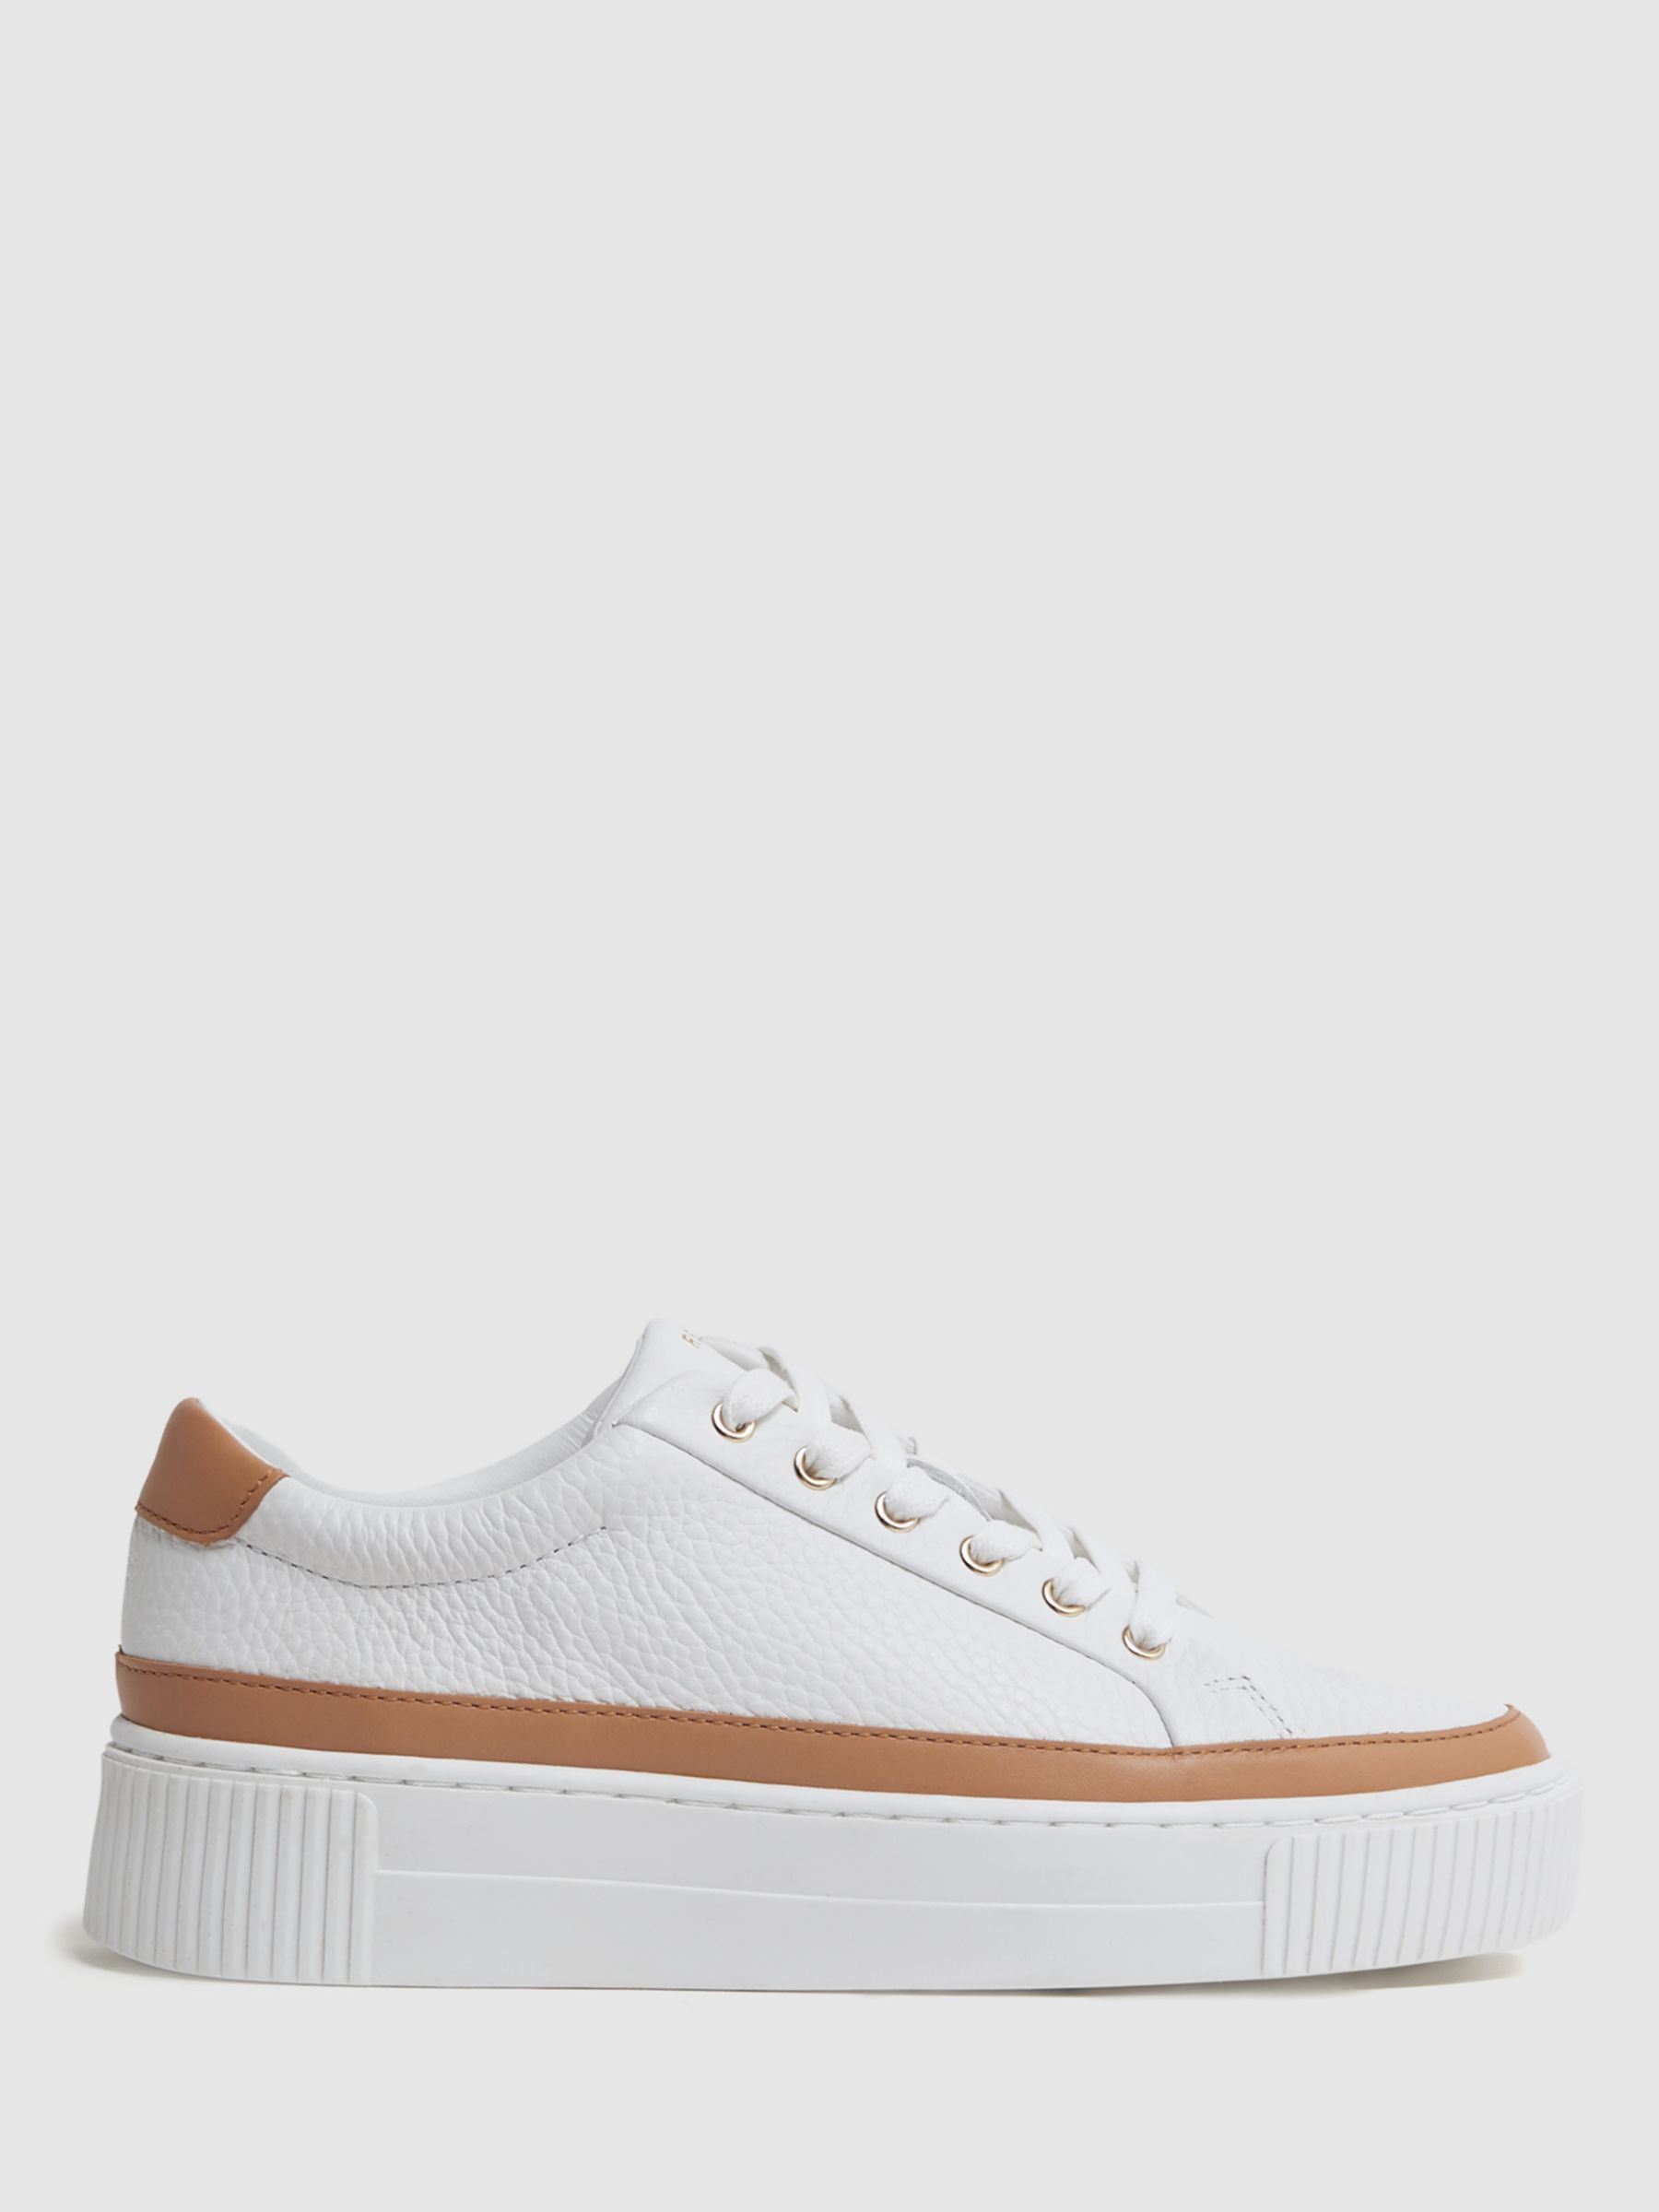 Reiss Leanne Leather Low Top Trainers, Camel/White at John Lewis & Partners